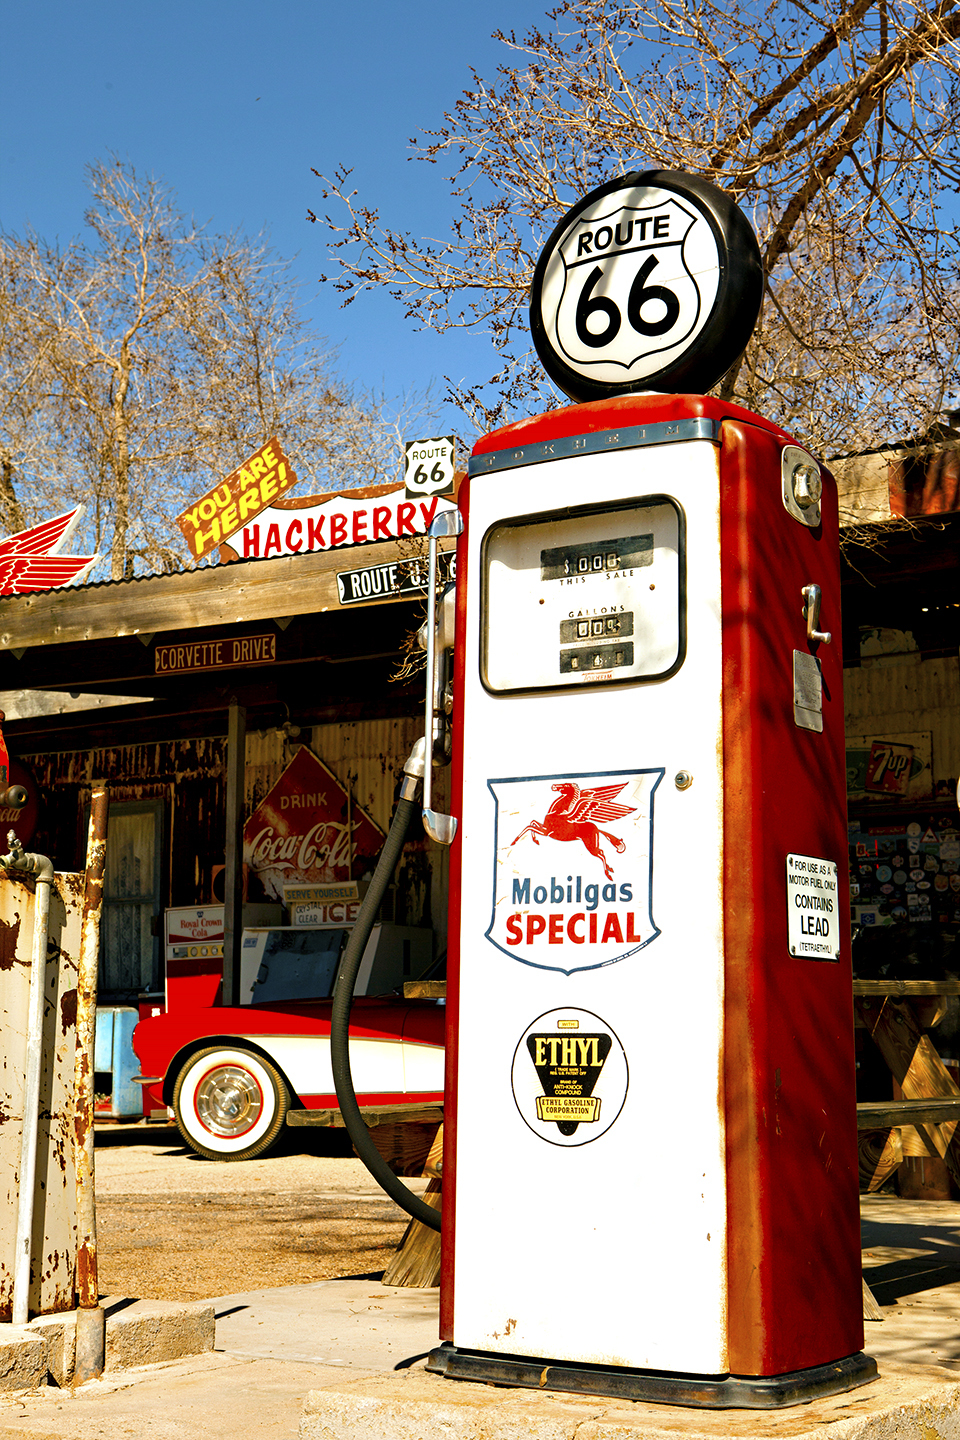 An icon on route 66